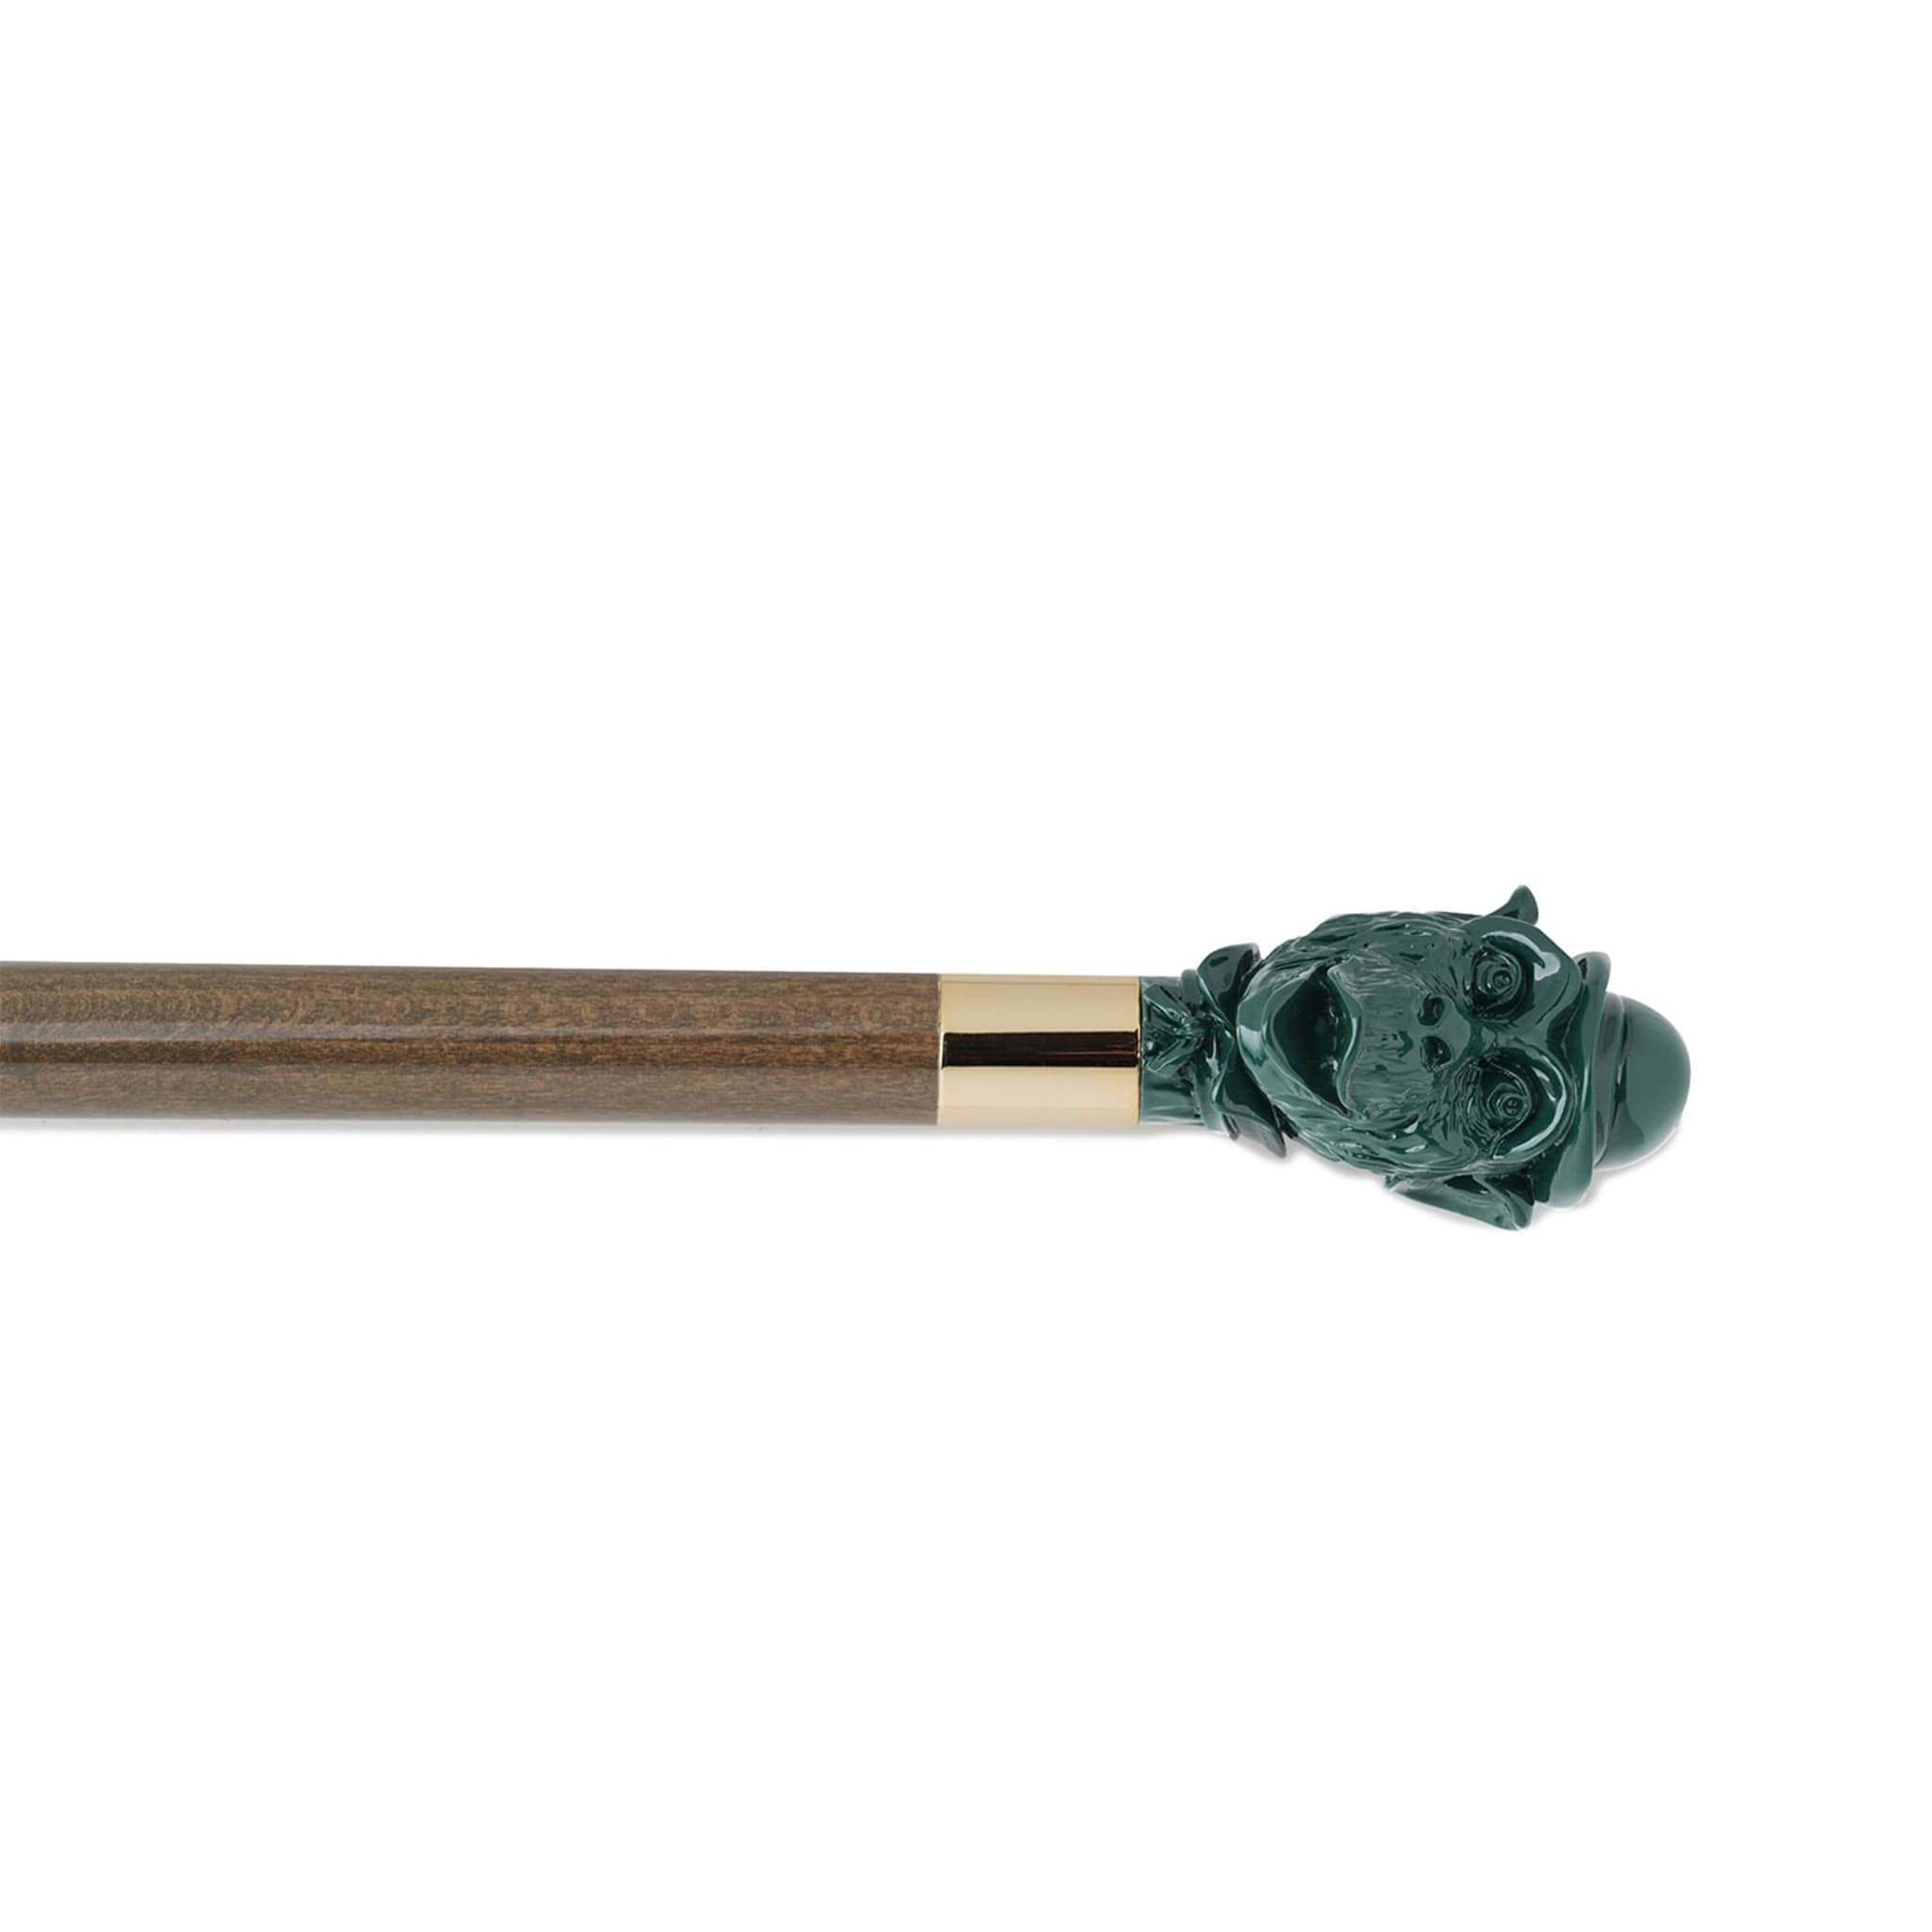 Taupe Ash Shoe Horn with Monkey-Head Petrol-Blue Handle - Alternative view 2